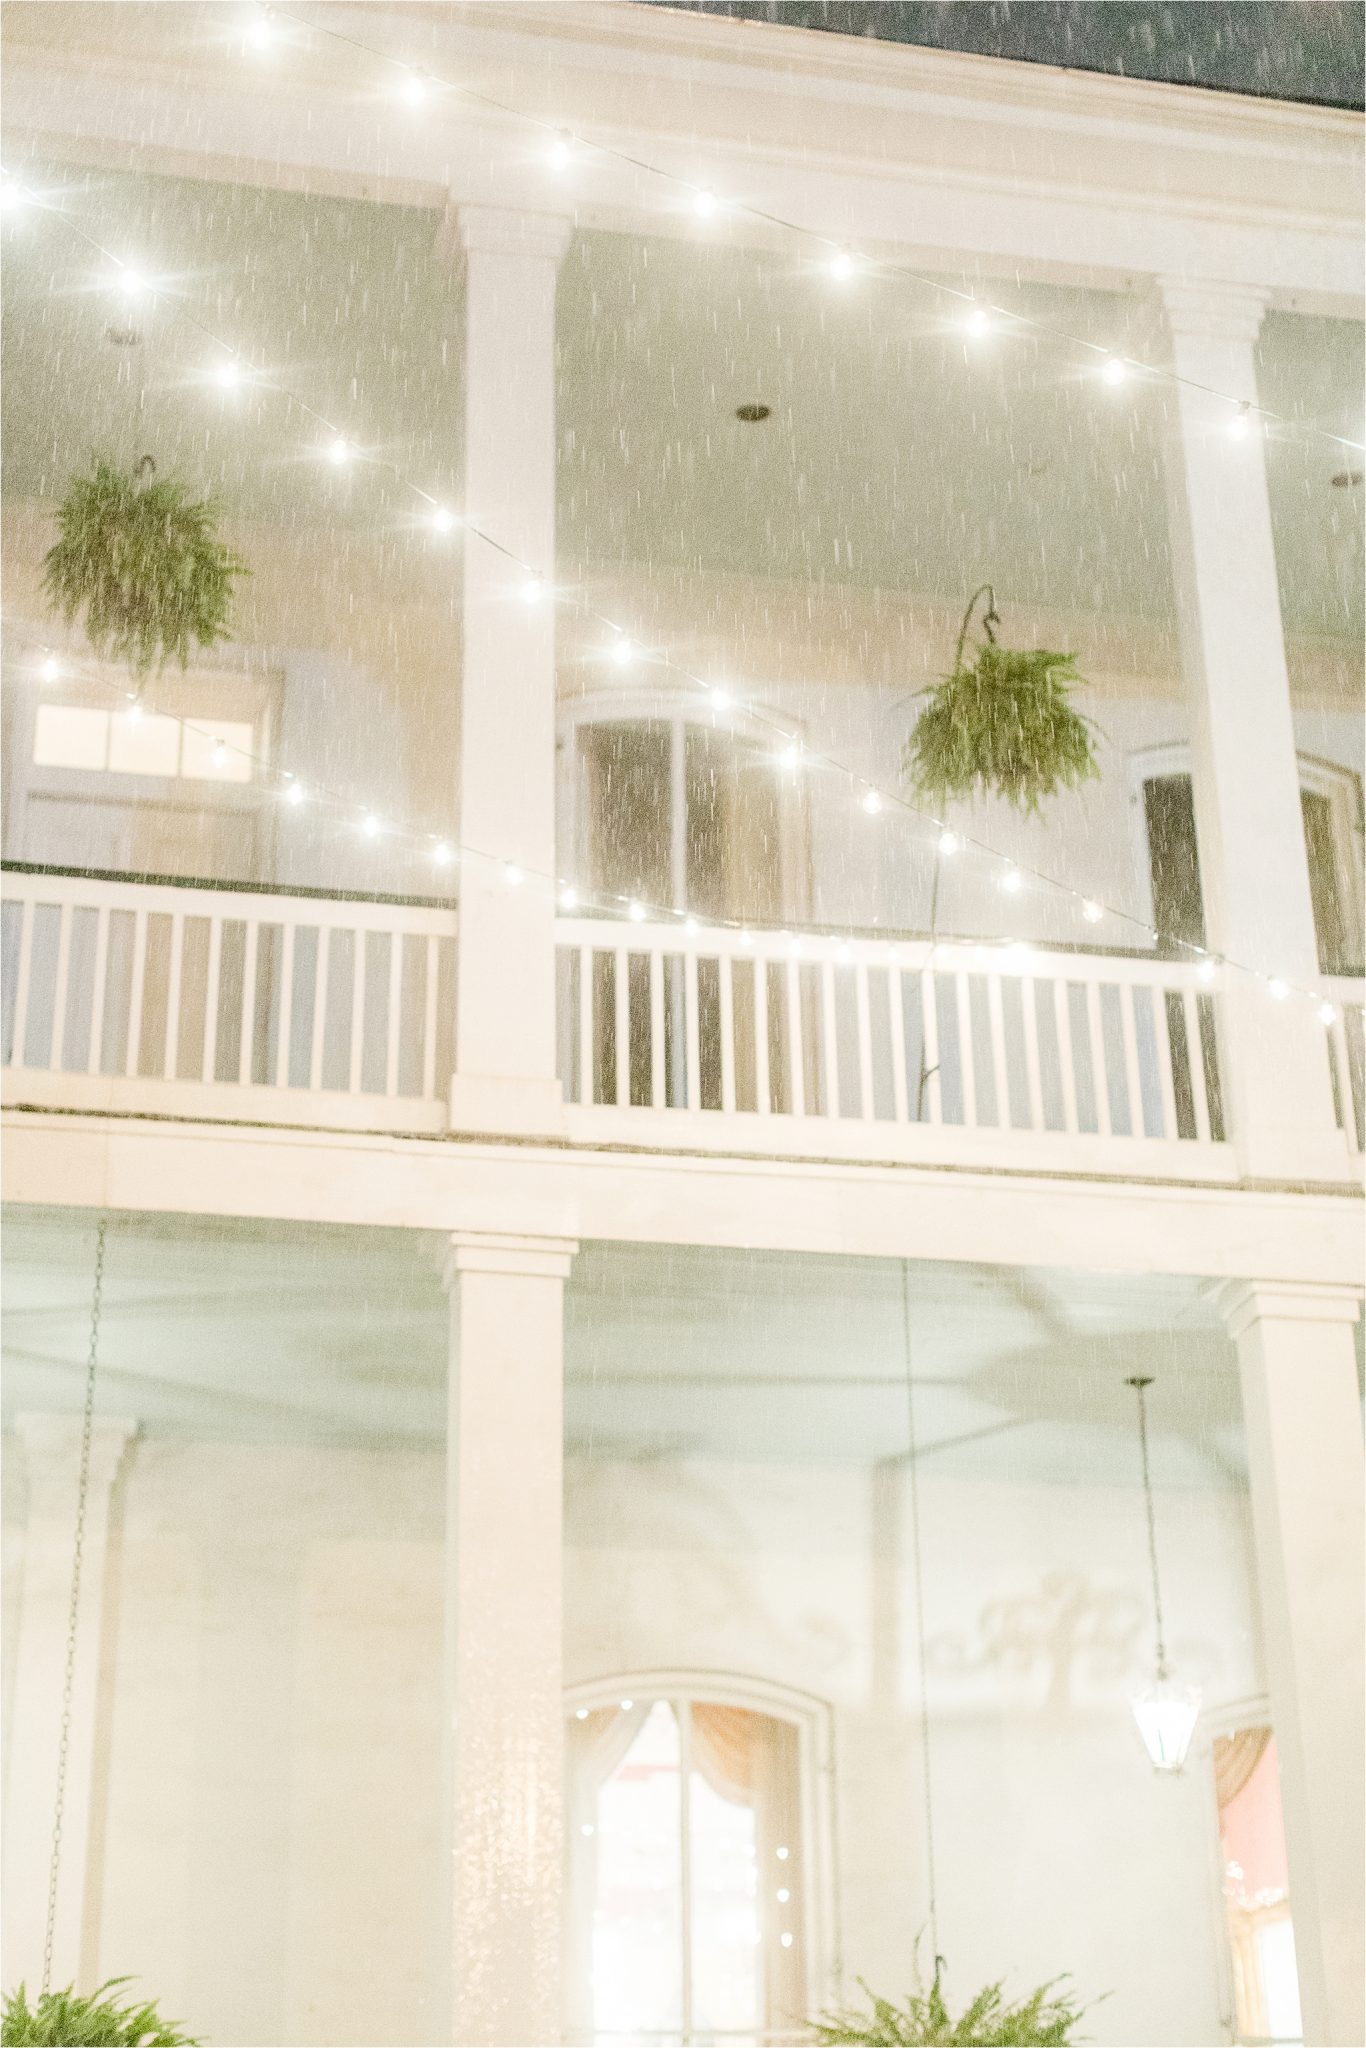 ezell house historic downtown mobile-alabama-wedding venue-drapping lights